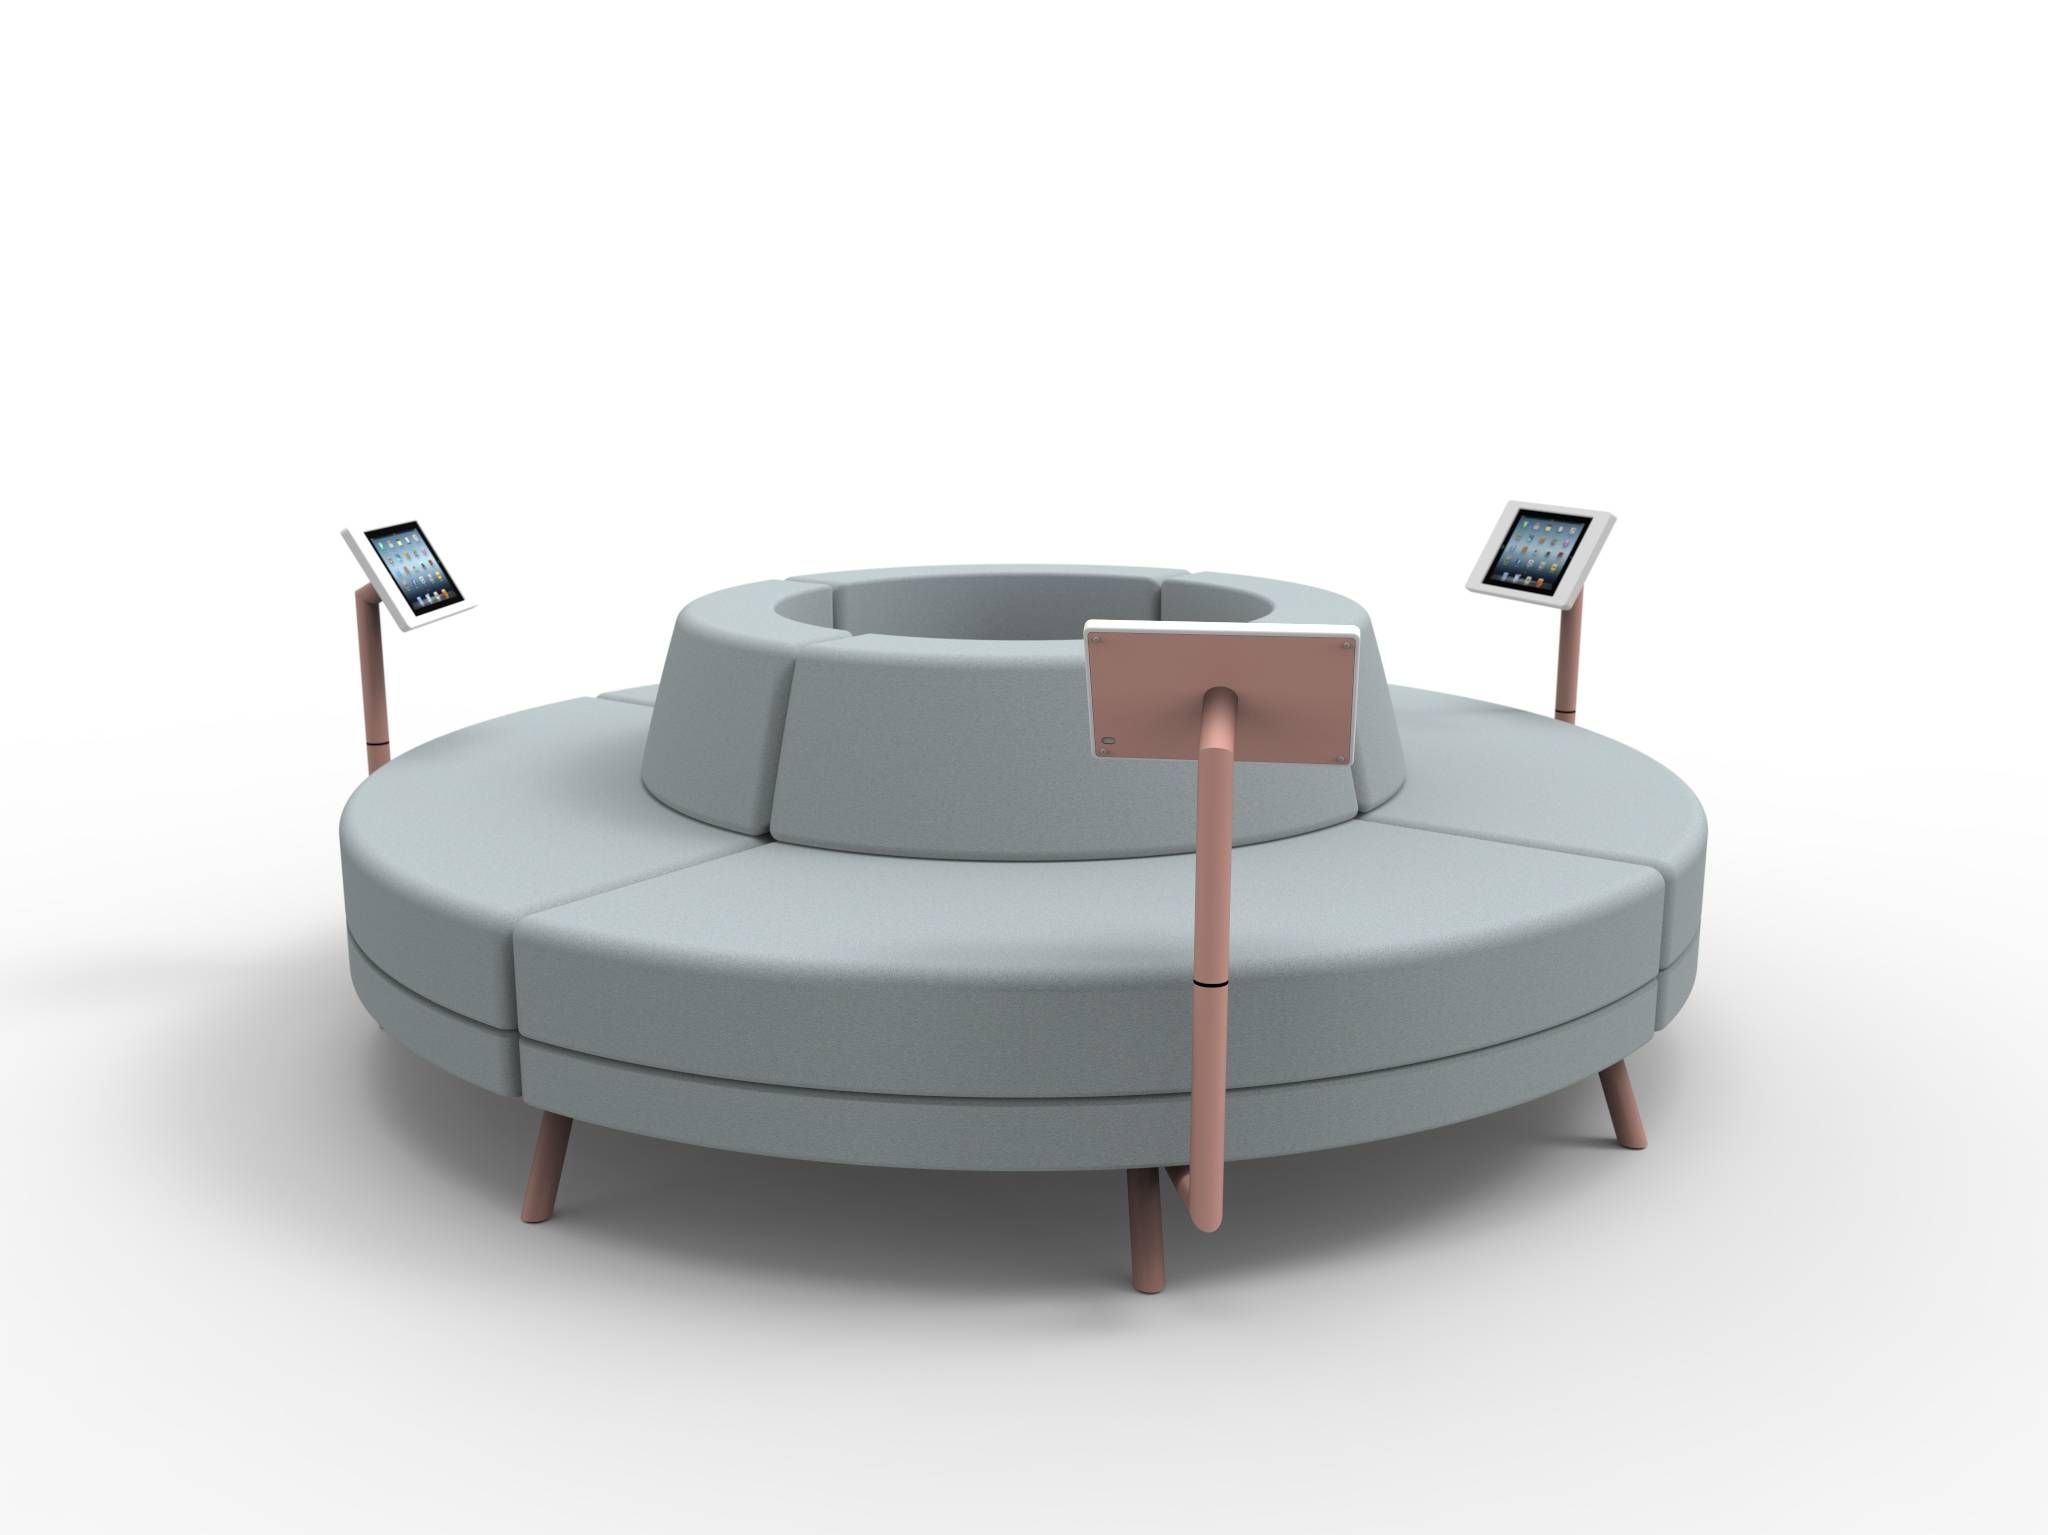 Furniture: Create Your Comfortable Living Room Decor With Round Pertaining To Leather Modular Sectional Sofas (View 11 of 30)